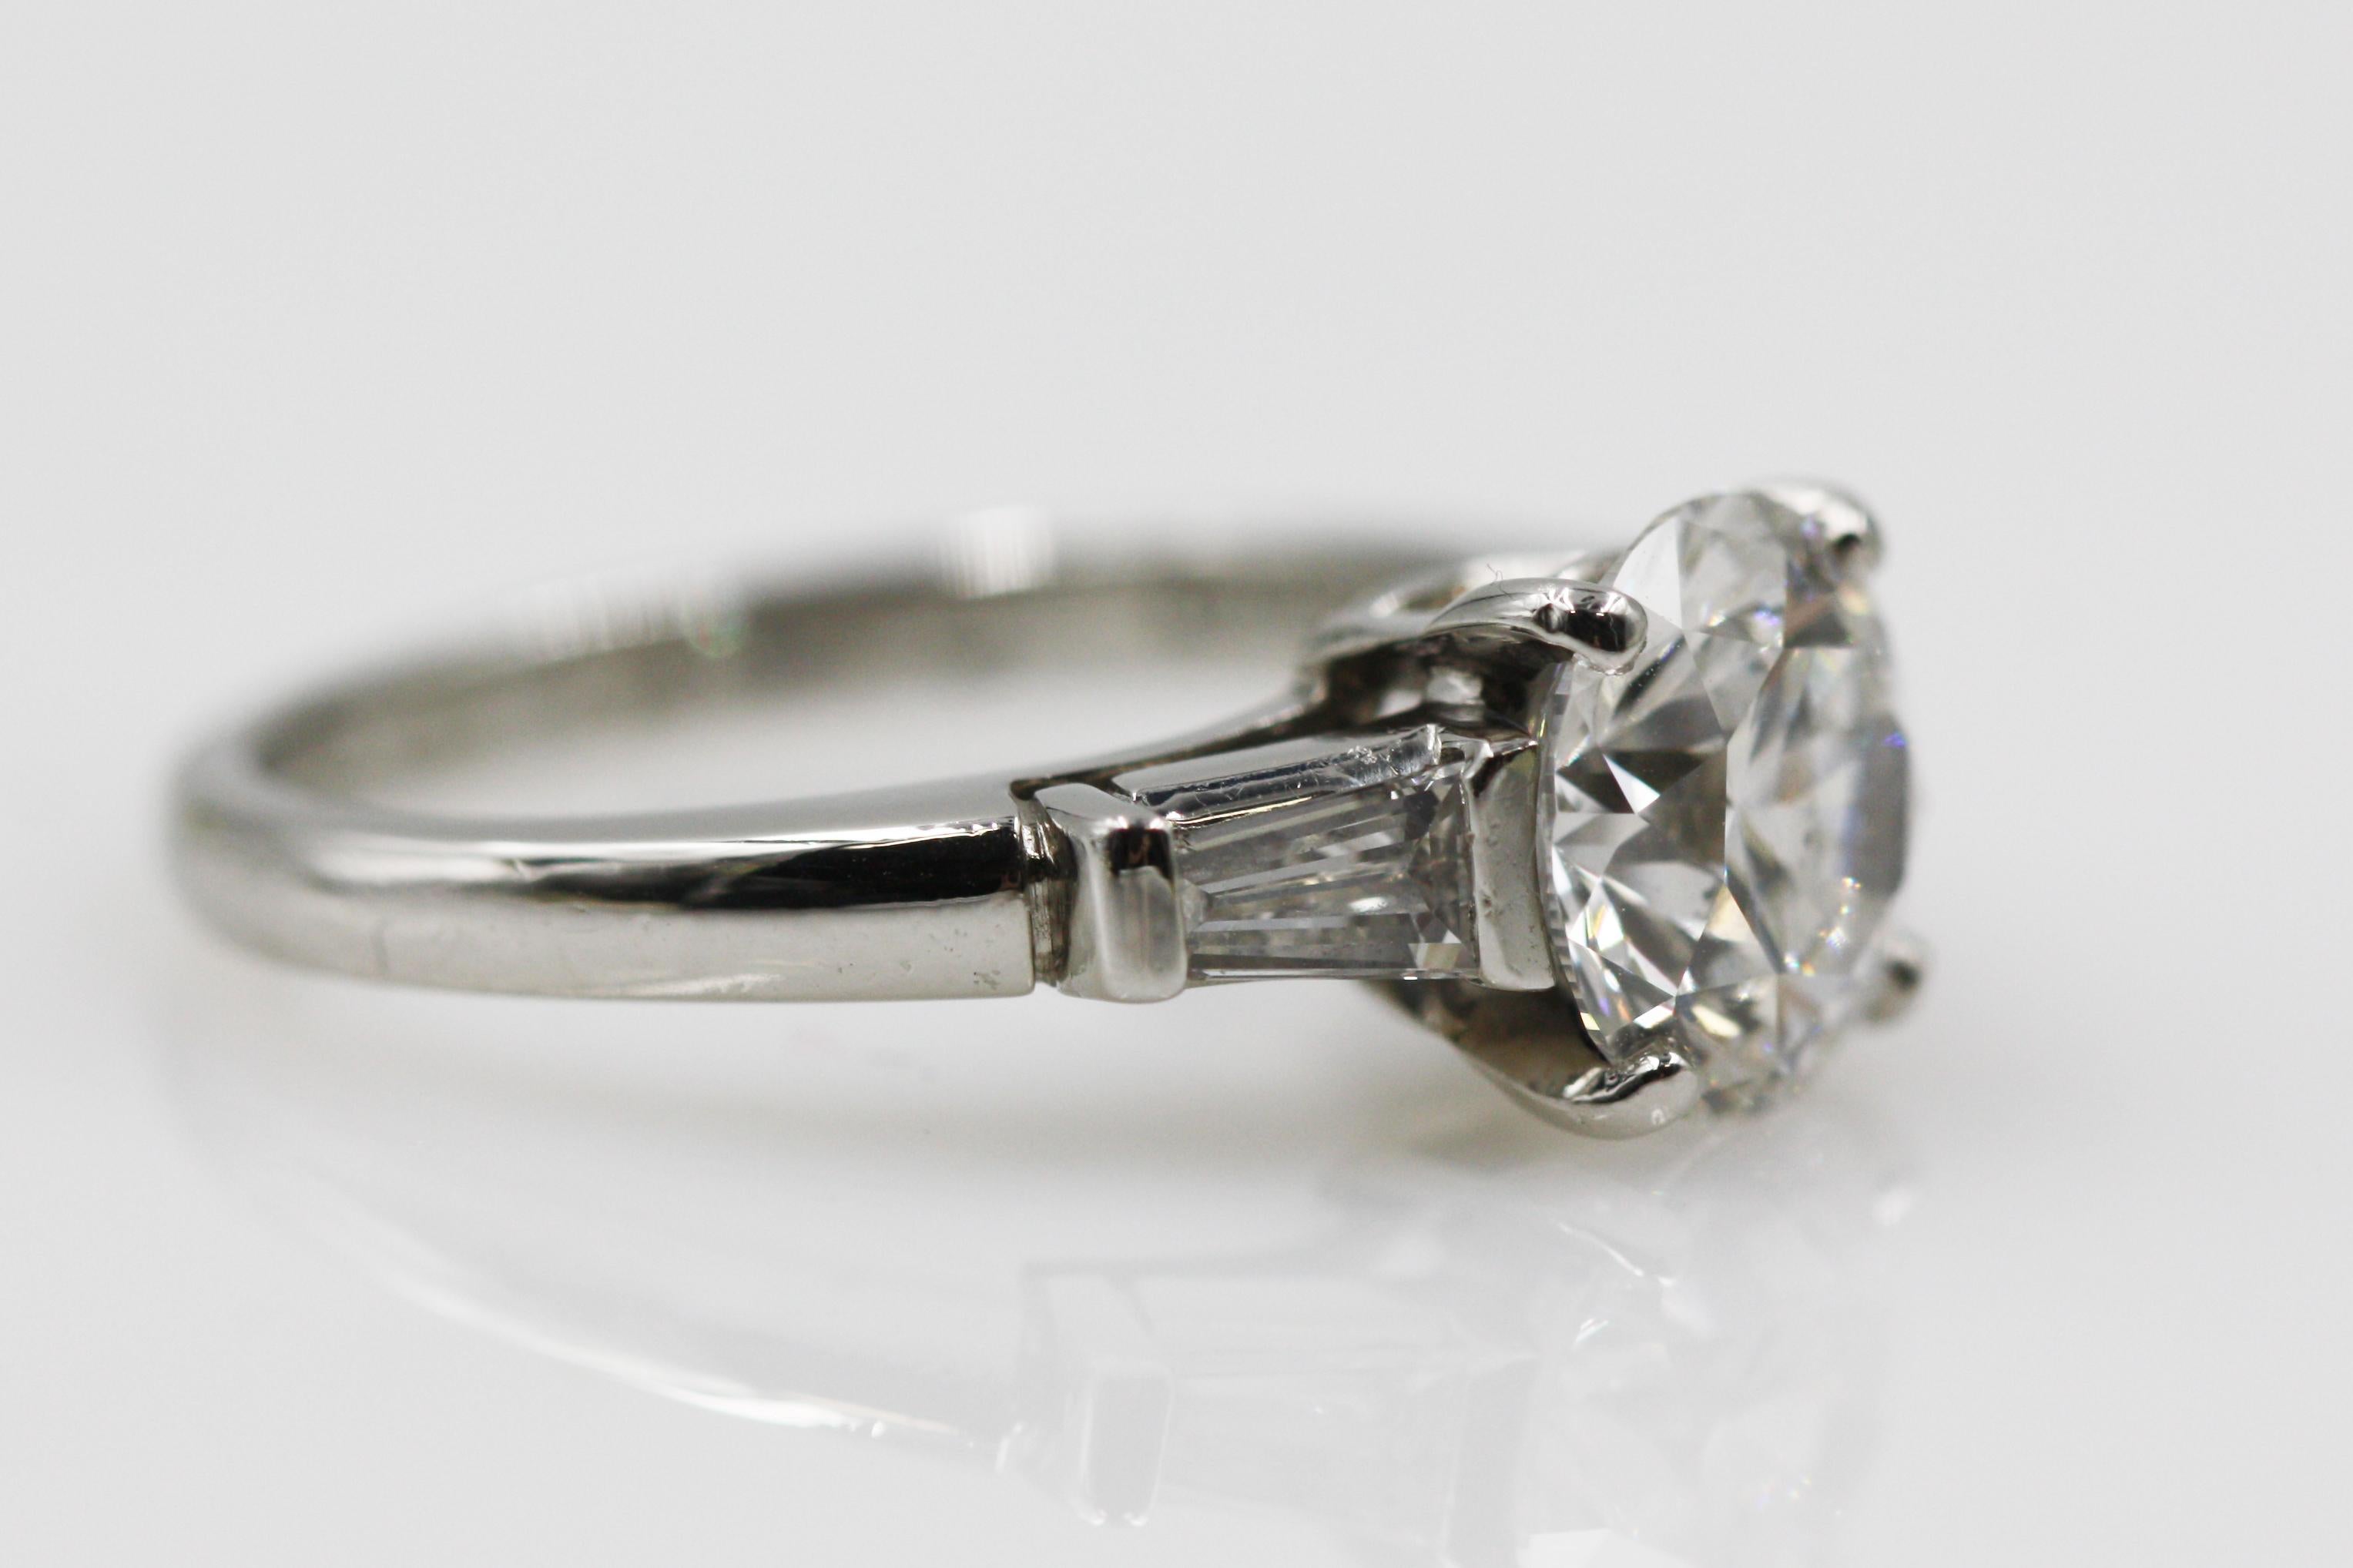 Tiffany & Co. Platinum Diamond Ring with Tapered Baguettes 2.10 Carat, VS1, E In Excellent Condition For Sale In New York, NY